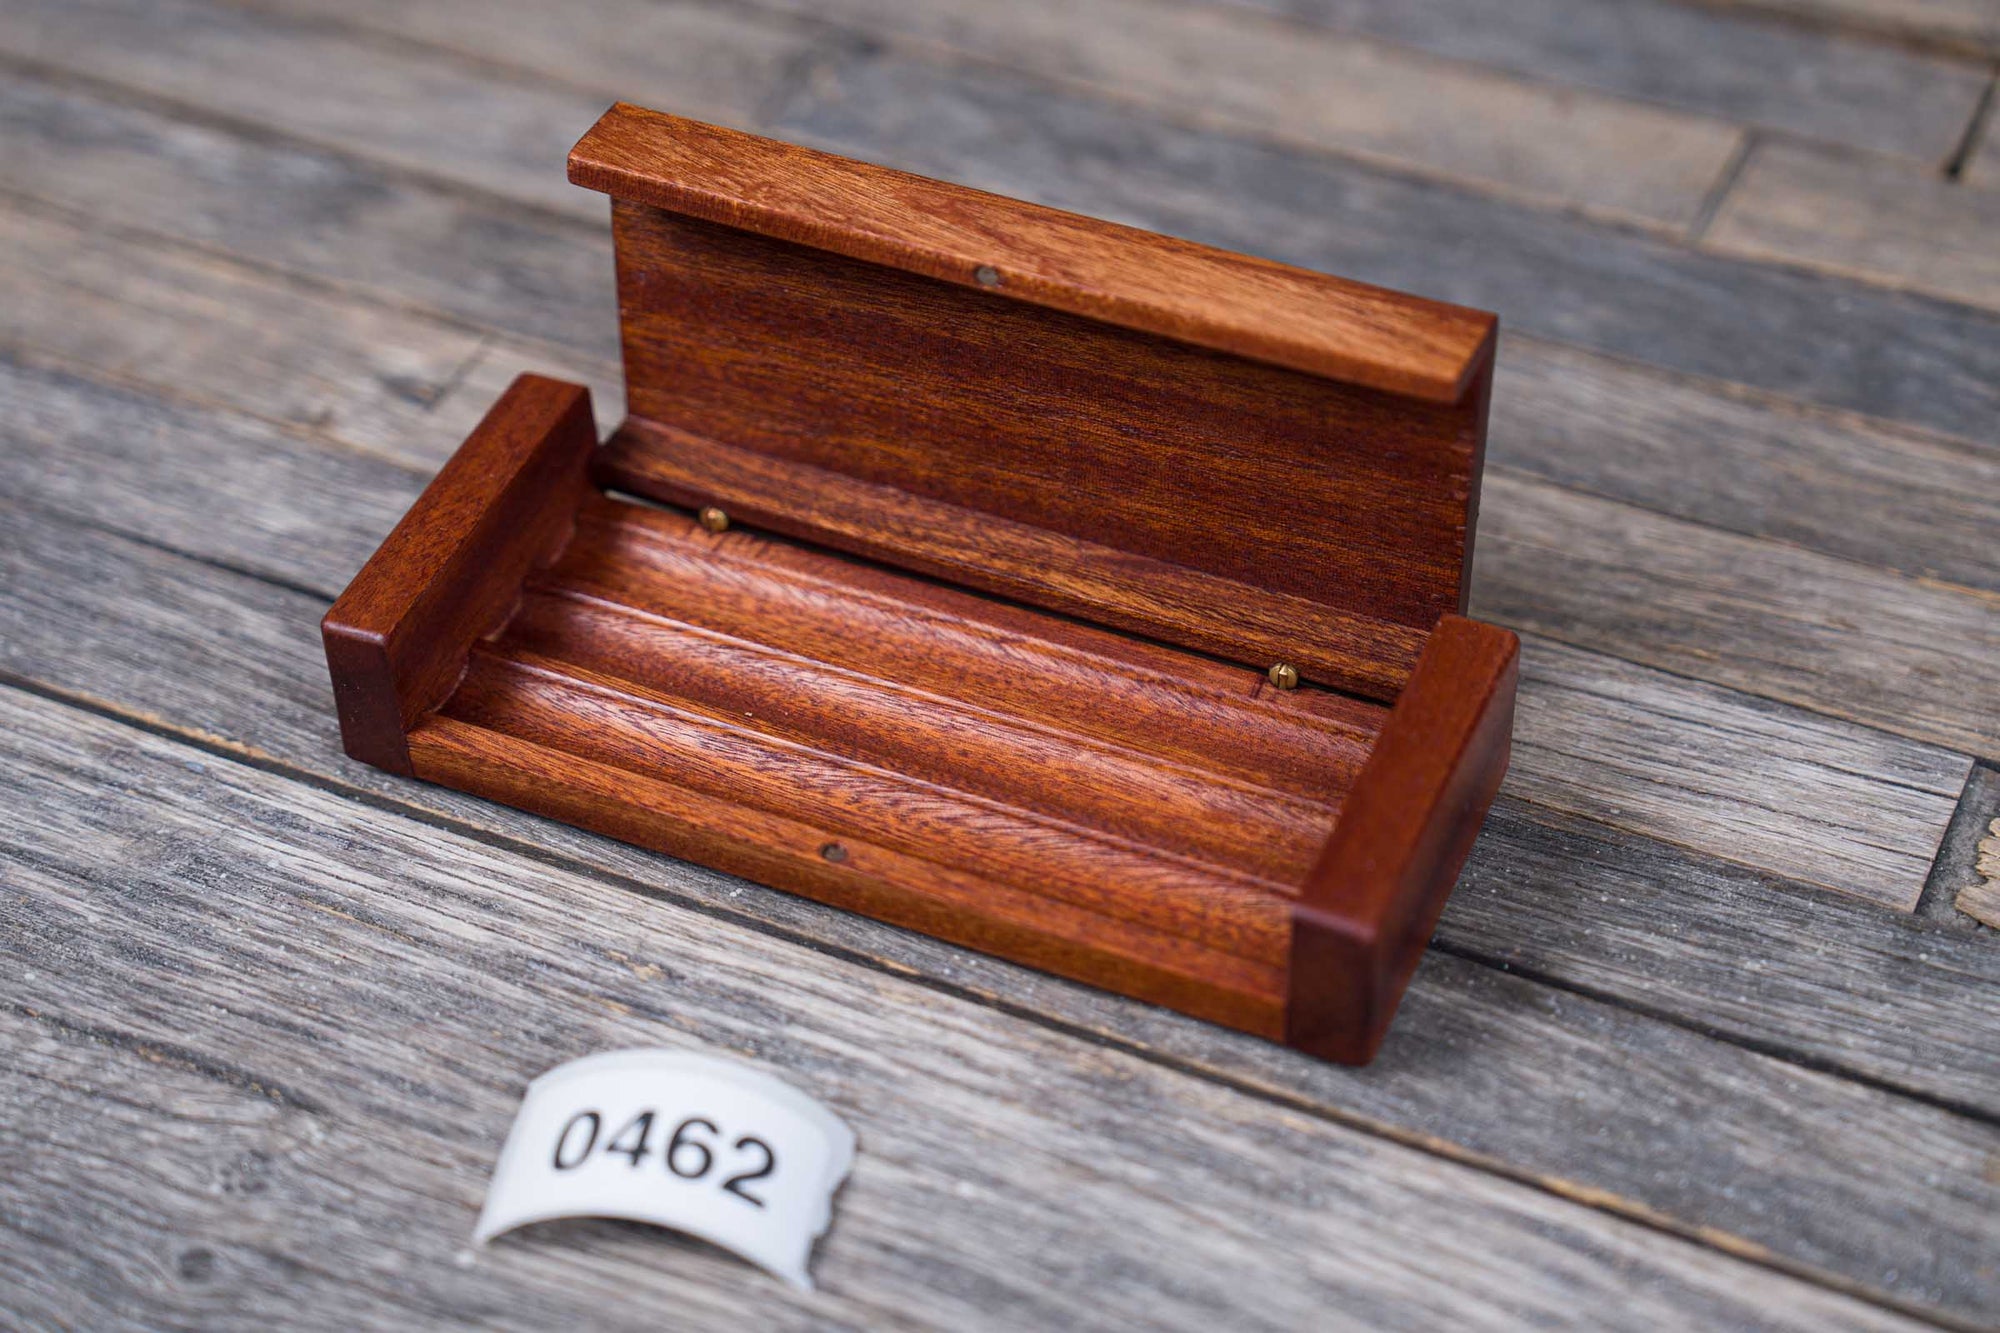 SECONDS Wooden Pen Display Case with Lid- 462